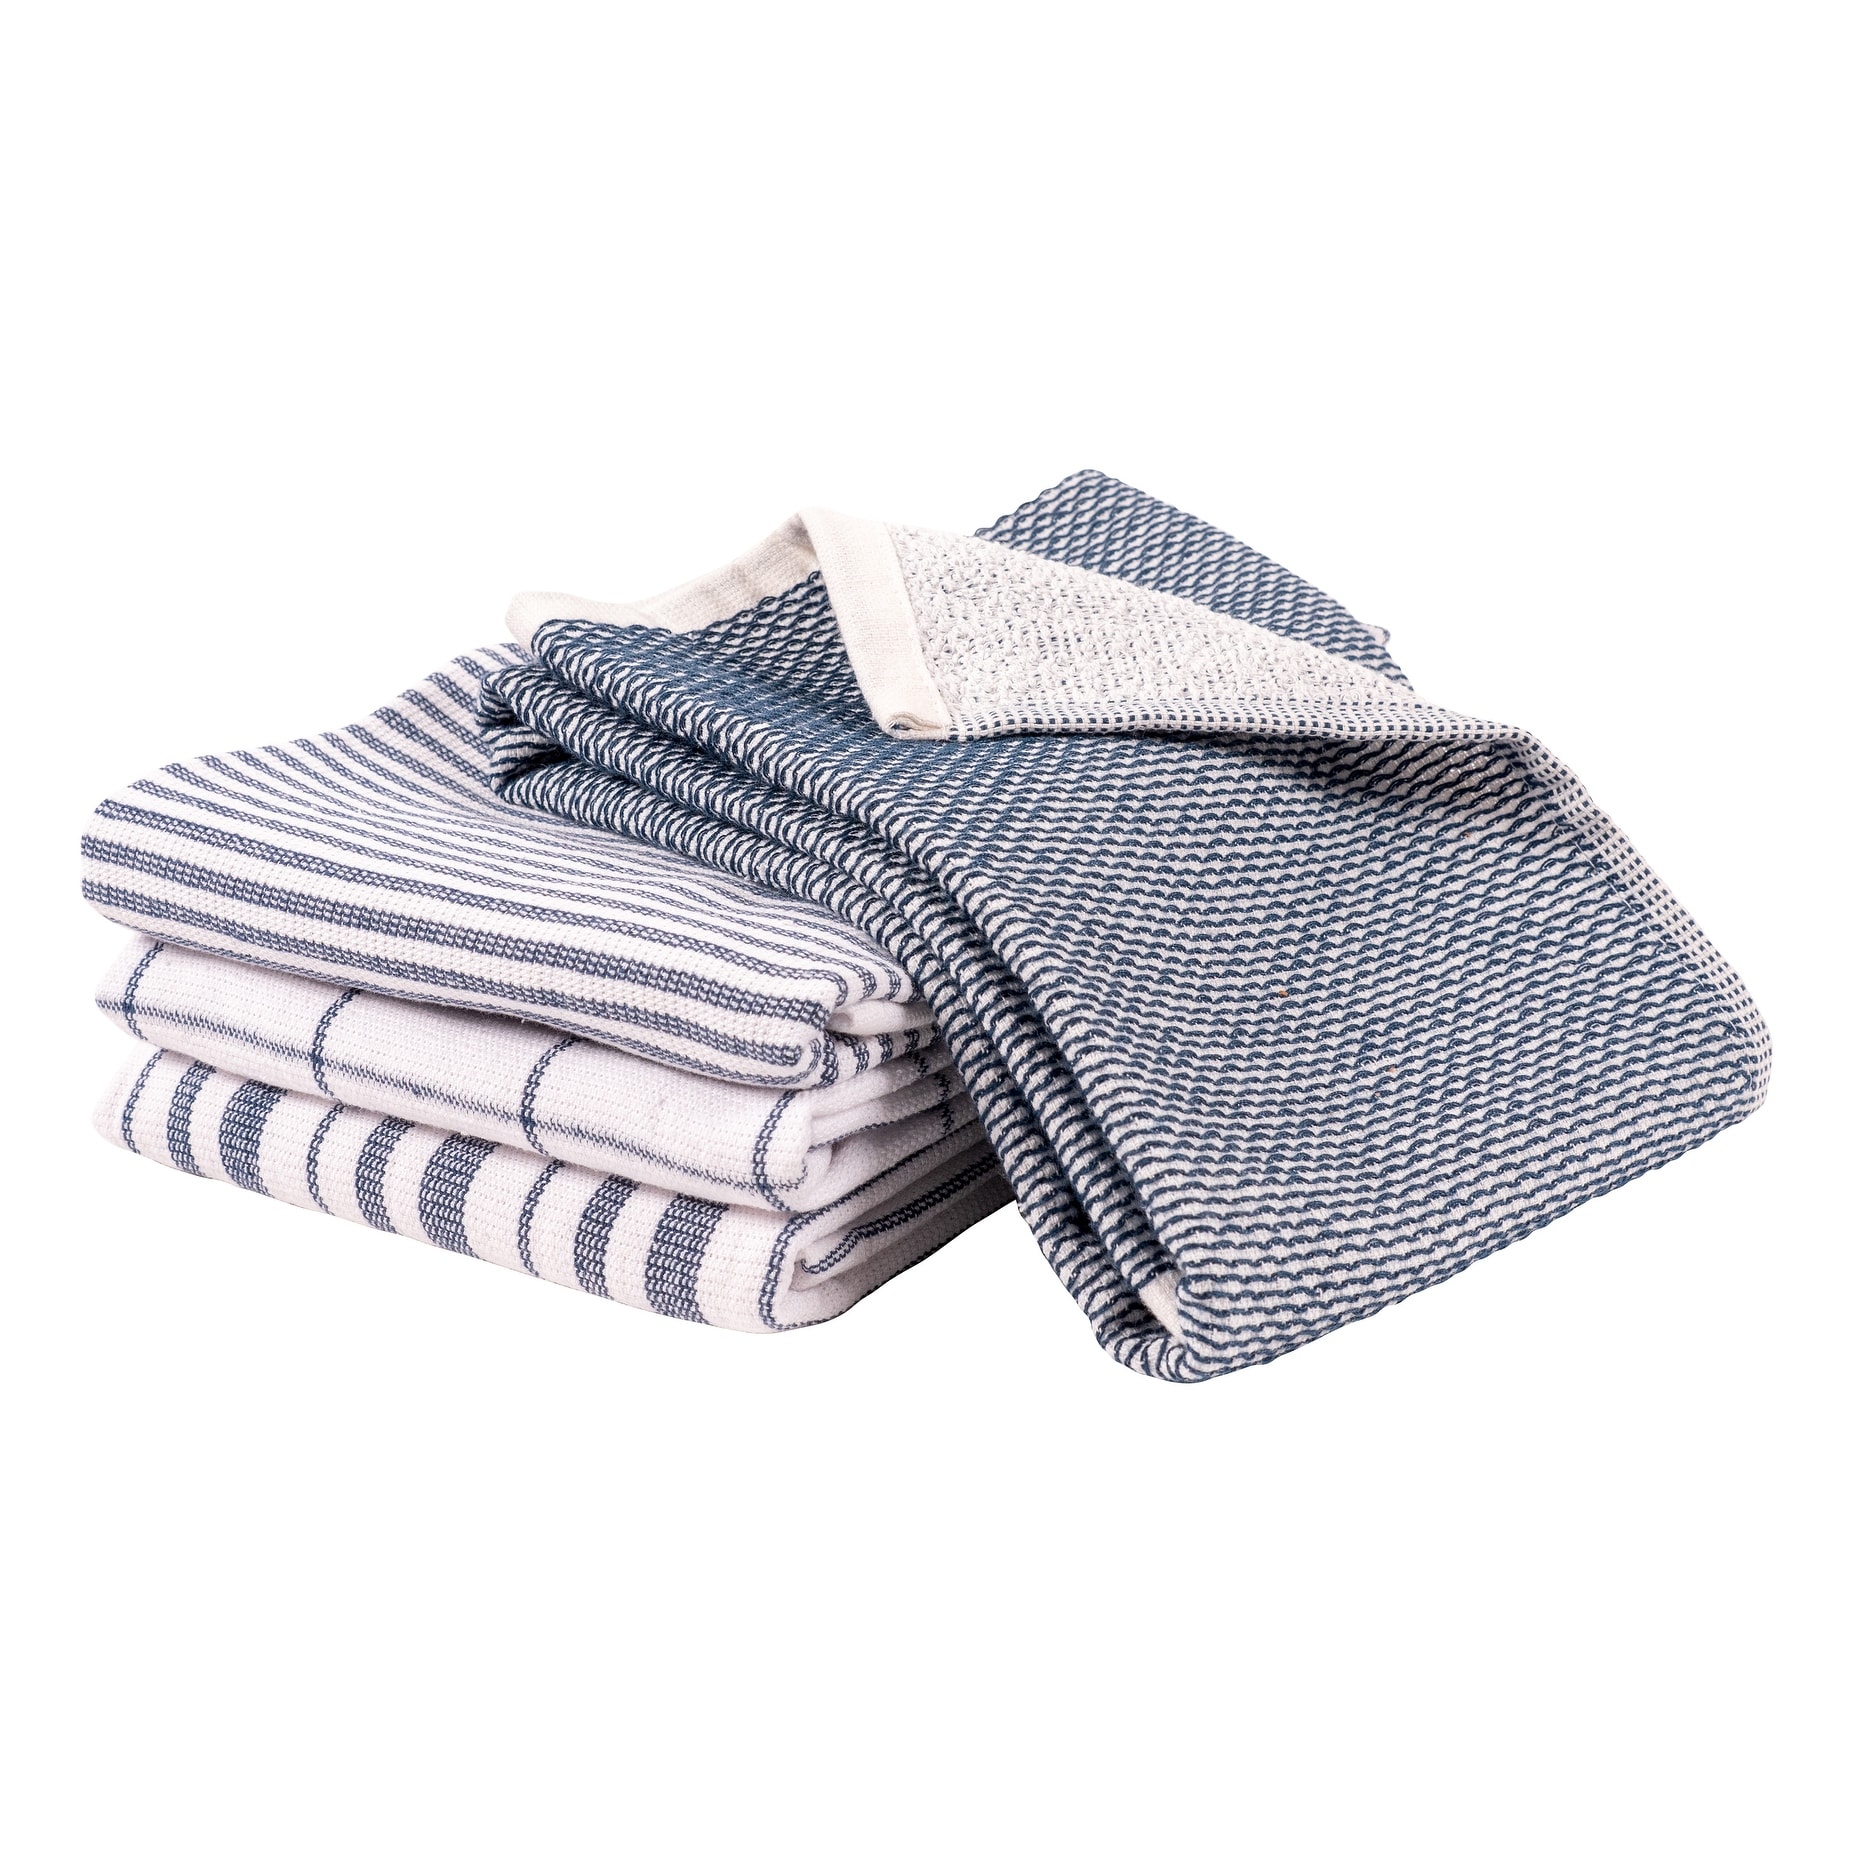 Our Table Dual Purpose Kitchen Towels - Set of 4 - 30 L x 20 W